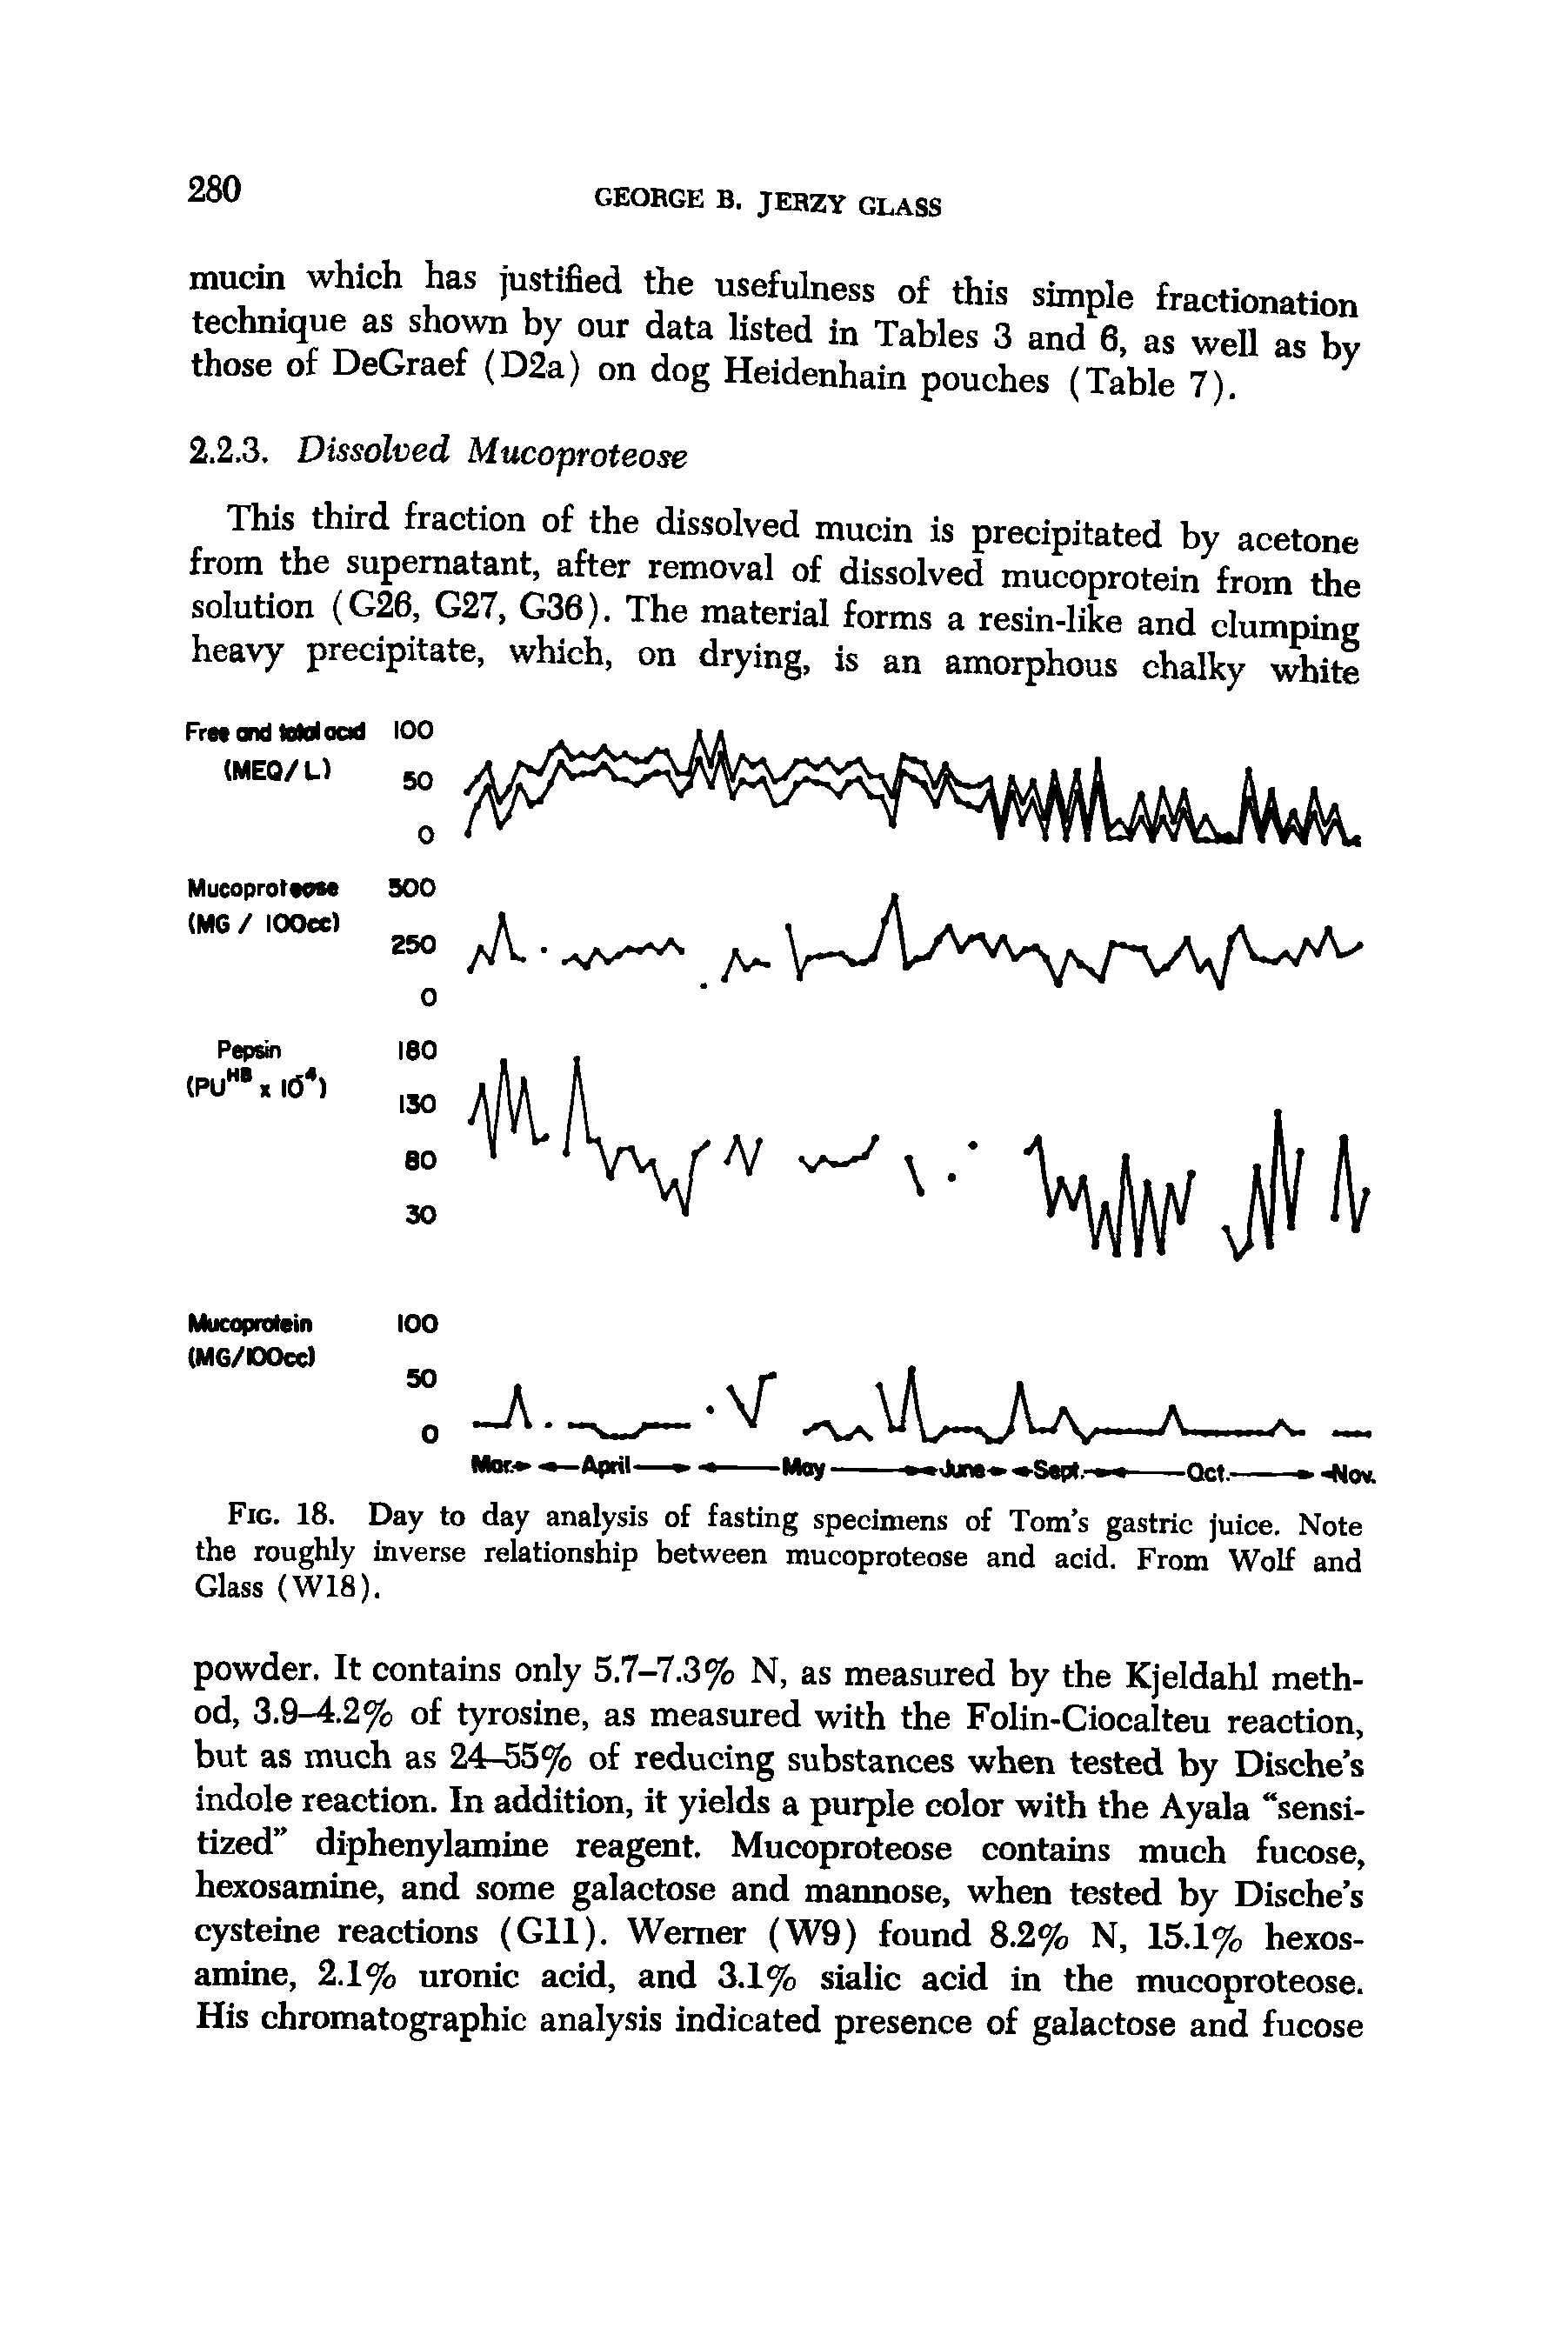 Fig. 18. Day to day analysis of fasting specimens of Tom s gastric juice. Note the roughly inverse relationship between mucoproteose and acid. From Wolf and Glass (W18).